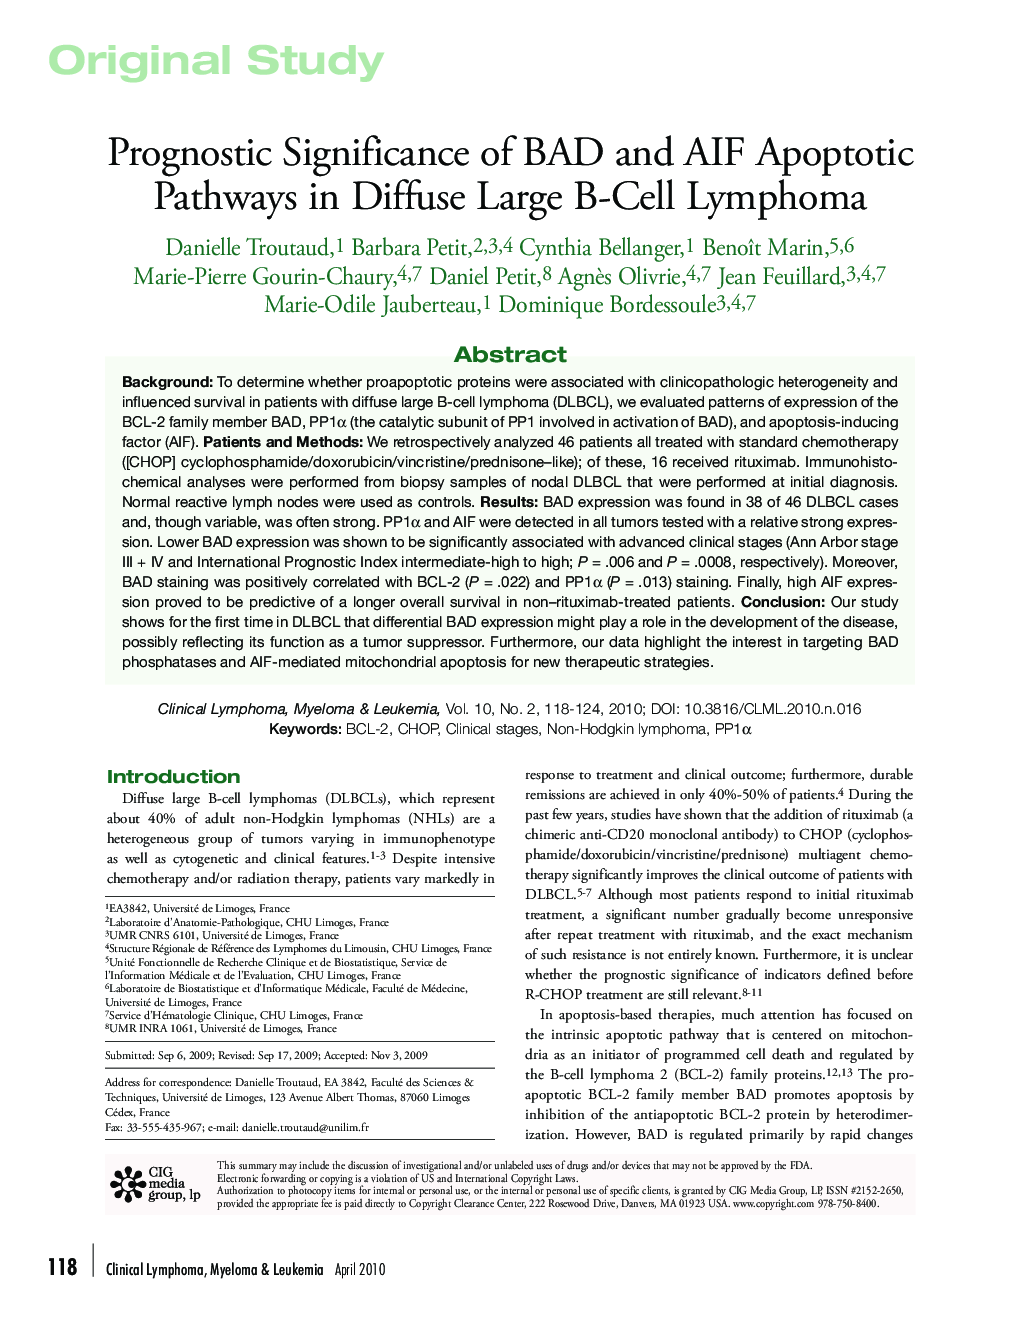 Prognostic Significance of BAD and AIF Apoptotic Pathways in Diffuse Large B-Cell Lymphoma 